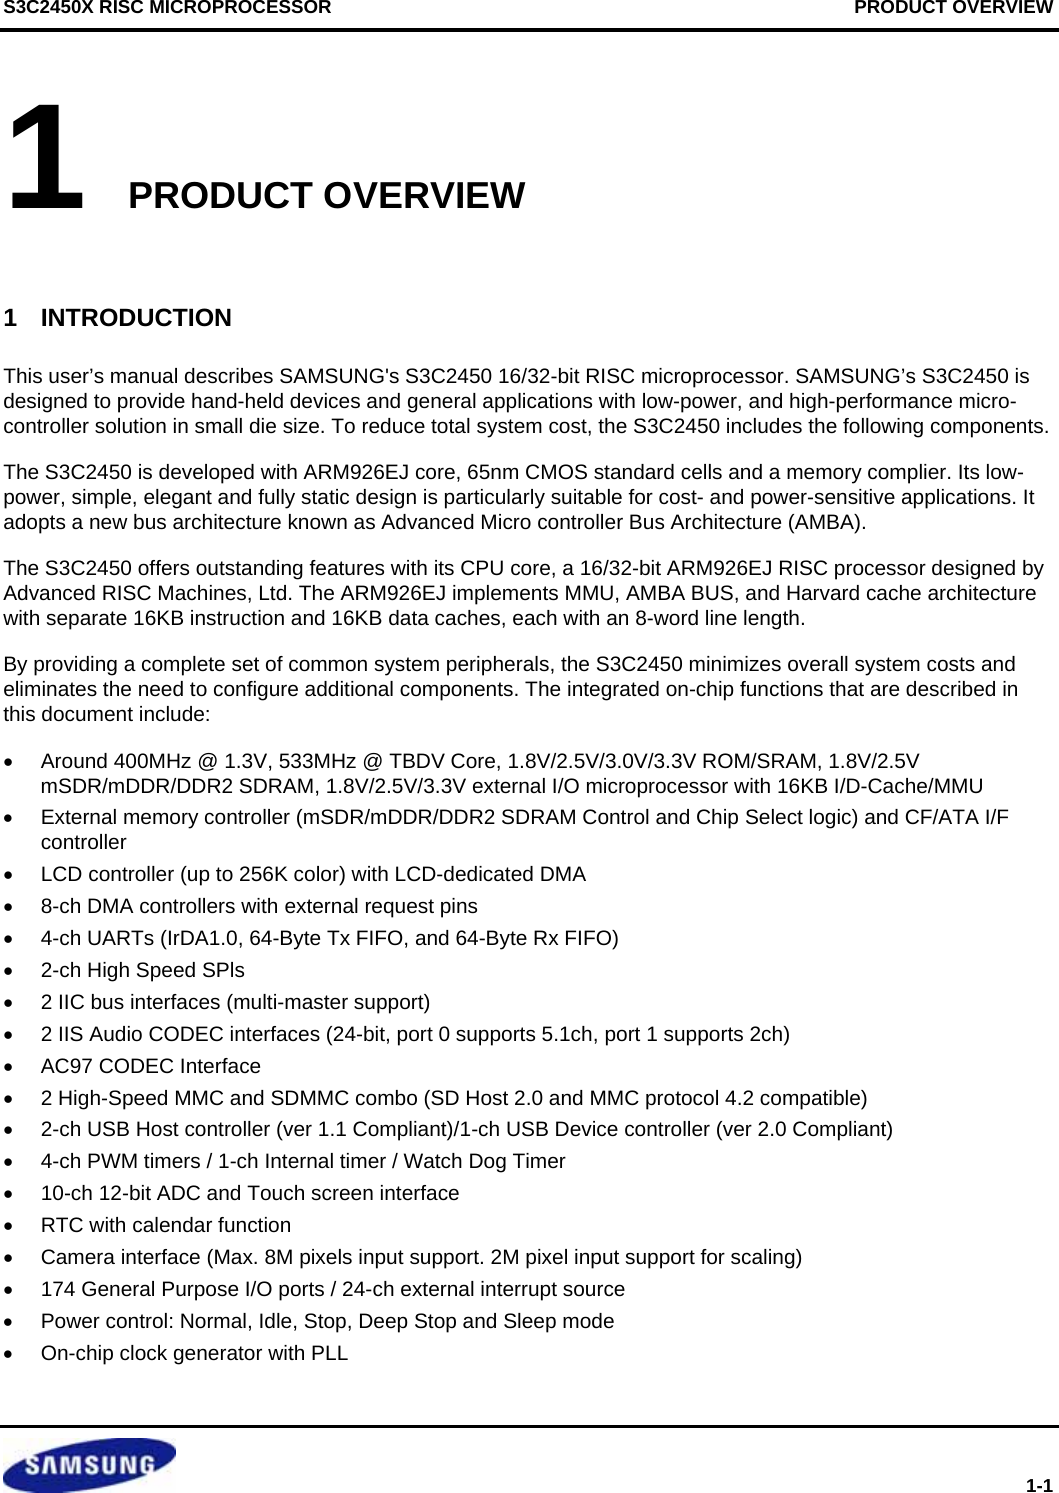 S3C2450X RISC MICROPROCESSOR                                      PRODUCT OVERVIEW  1-1 1 PRODUCT OVERVIEW  1  INTRODUCTION This user’s manual describes SAMSUNG&apos;s S3C2450 16/32-bit RISC microprocessor. SAMSUNG’s S3C2450 is designed to provide hand-held devices and general applications with low-power, and high-performance micro-controller solution in small die size. To reduce total system cost, the S3C2450 includes the following components. The S3C2450 is developed with ARM926EJ core, 65nm CMOS standard cells and a memory complier. Its low-power, simple, elegant and fully static design is particularly suitable for cost- and power-sensitive applications. It adopts a new bus architecture known as Advanced Micro controller Bus Architecture (AMBA). The S3C2450 offers outstanding features with its CPU core, a 16/32-bit ARM926EJ RISC processor designed by Advanced RISC Machines, Ltd. The ARM926EJ implements MMU, AMBA BUS, and Harvard cache architecture with separate 16KB instruction and 16KB data caches, each with an 8-word line length. By providing a complete set of common system peripherals, the S3C2450 minimizes overall system costs and eliminates the need to configure additional components. The integrated on-chip functions that are described in this document include:   •  Around 400MHz @ 1.3V, 533MHz @ TBDV Core, 1.8V/2.5V/3.0V/3.3V ROM/SRAM, 1.8V/2.5V  mSDR/mDDR/DDR2 SDRAM, 1.8V/2.5V/3.3V external I/O microprocessor with 16KB I/D-Cache/MMU •  External memory controller (mSDR/mDDR/DDR2 SDRAM Control and Chip Select logic) and CF/ATA I/F controller •  LCD controller (up to 256K color) with LCD-dedicated DMA •  8-ch DMA controllers with external request pins   •  4-ch UARTs (IrDA1.0, 64-Byte Tx FIFO, and 64-Byte Rx FIFO)  •  2-ch High Speed SPls  •  2 IIC bus interfaces (multi-master support) •  2 IIS Audio CODEC interfaces (24-bit, port 0 supports 5.1ch, port 1 supports 2ch) •  AC97 CODEC Interface •  2 High-Speed MMC and SDMMC combo (SD Host 2.0 and MMC protocol 4.2 compatible) •  2-ch USB Host controller (ver 1.1 Compliant)/1-ch USB Device controller (ver 2.0 Compliant) •  4-ch PWM timers / 1-ch Internal timer / Watch Dog Timer  •  10-ch 12-bit ADC and Touch screen interface •  RTC with calendar function •  Camera interface (Max. 8M pixels input support. 2M pixel input support for scaling) •  174 General Purpose I/O ports / 24-ch external interrupt source •  Power control: Normal, Idle, Stop, Deep Stop and Sleep mode •  On-chip clock generator with PLL 